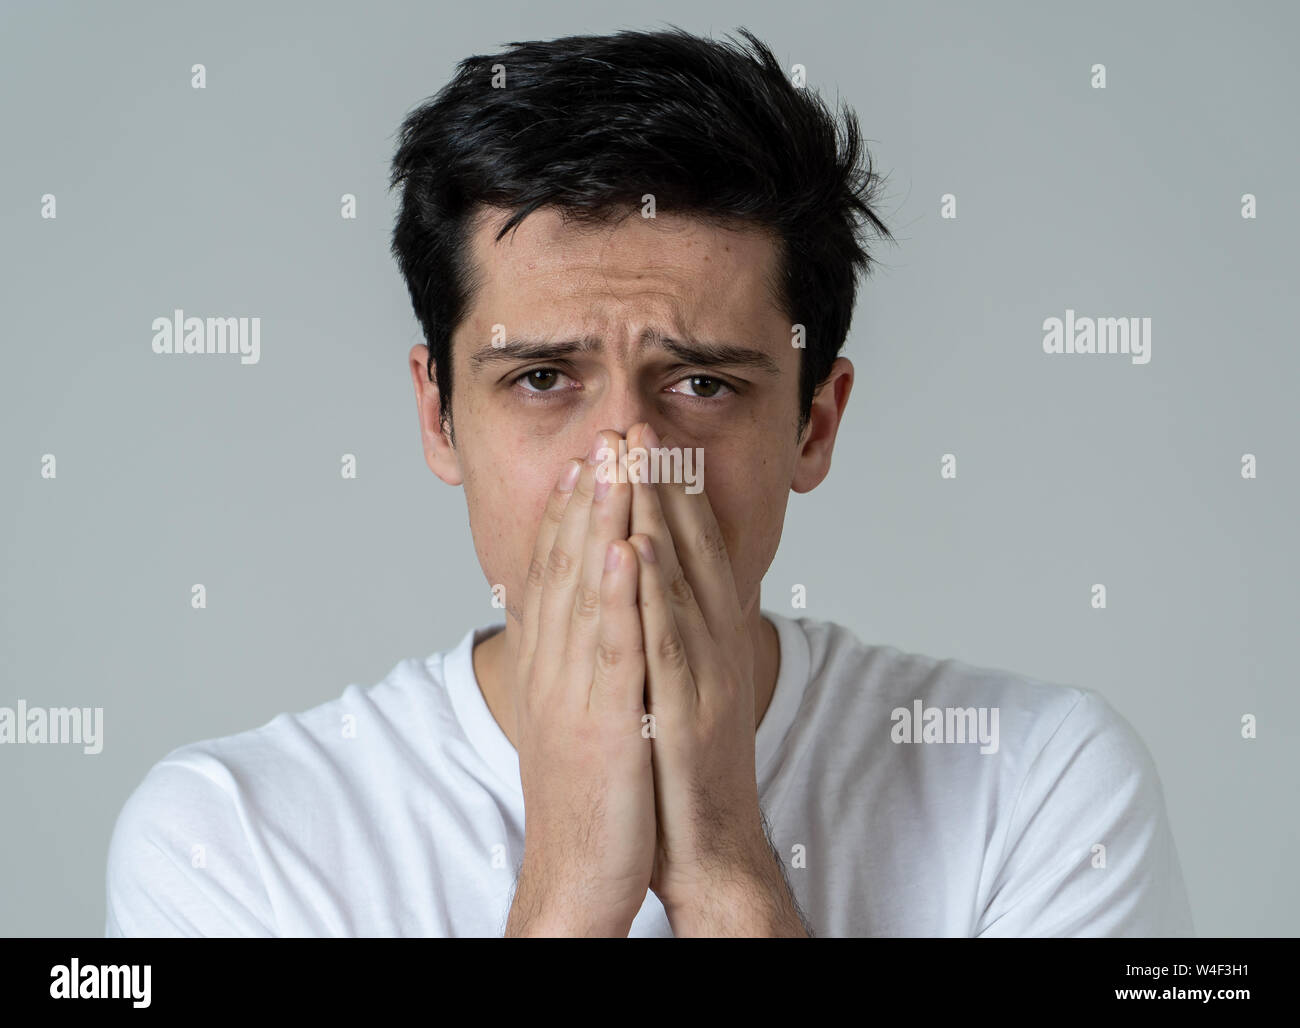 Close up of a young sad man, serious and concerned, looking worried and thoughtful. Covering her mouth like sneezing, feeling feverish and cold. With Stock Photo